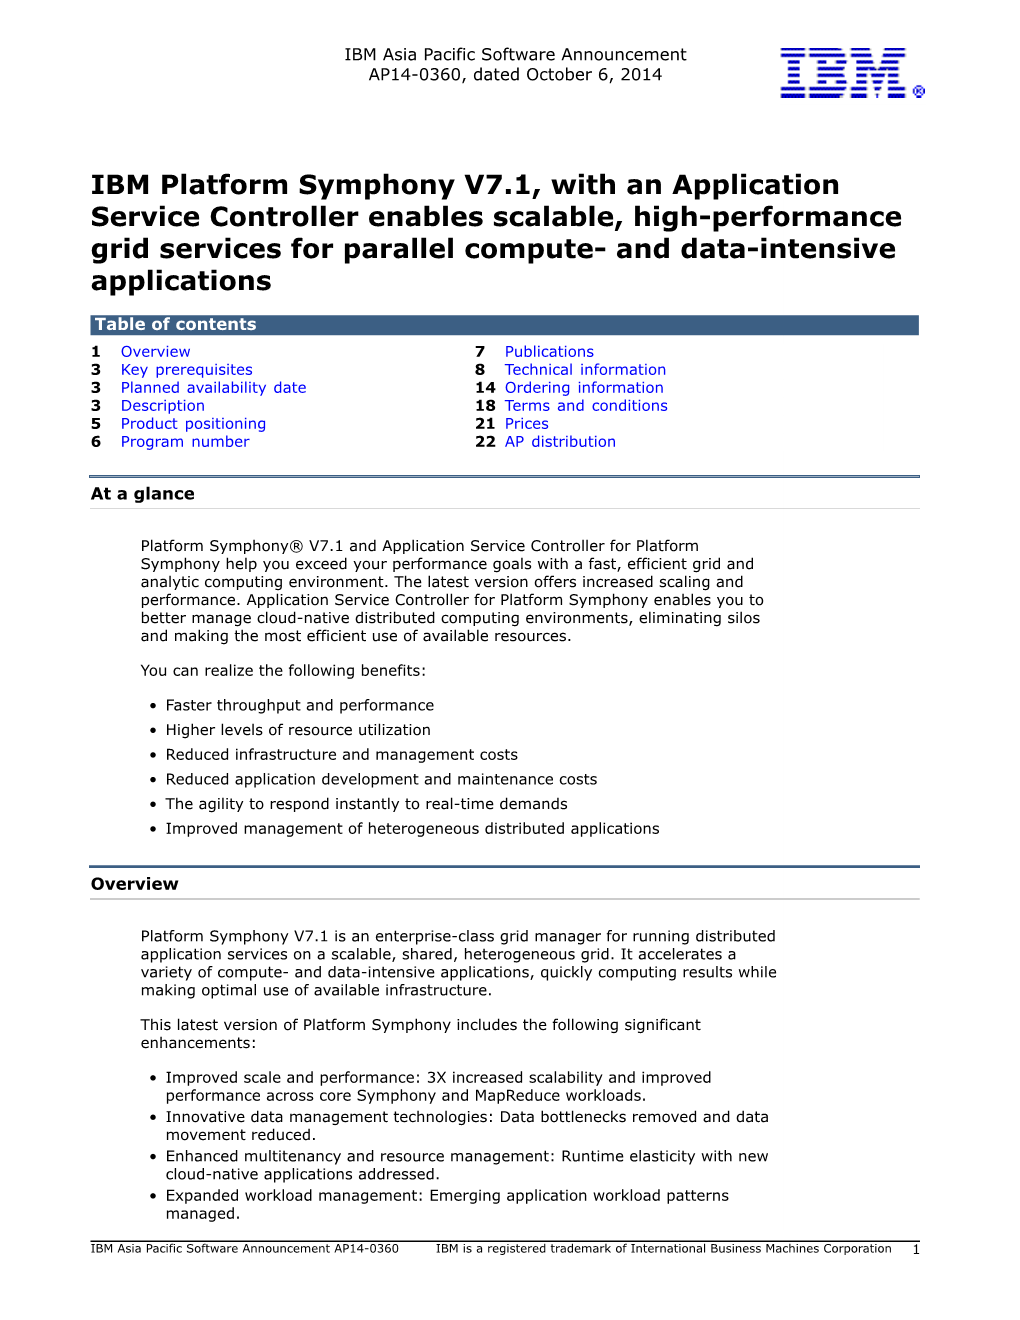 IBM Platform Symphony V7.1, with an Application Service Controller Enables Scalable, High-Performance Grid Services for Parallel